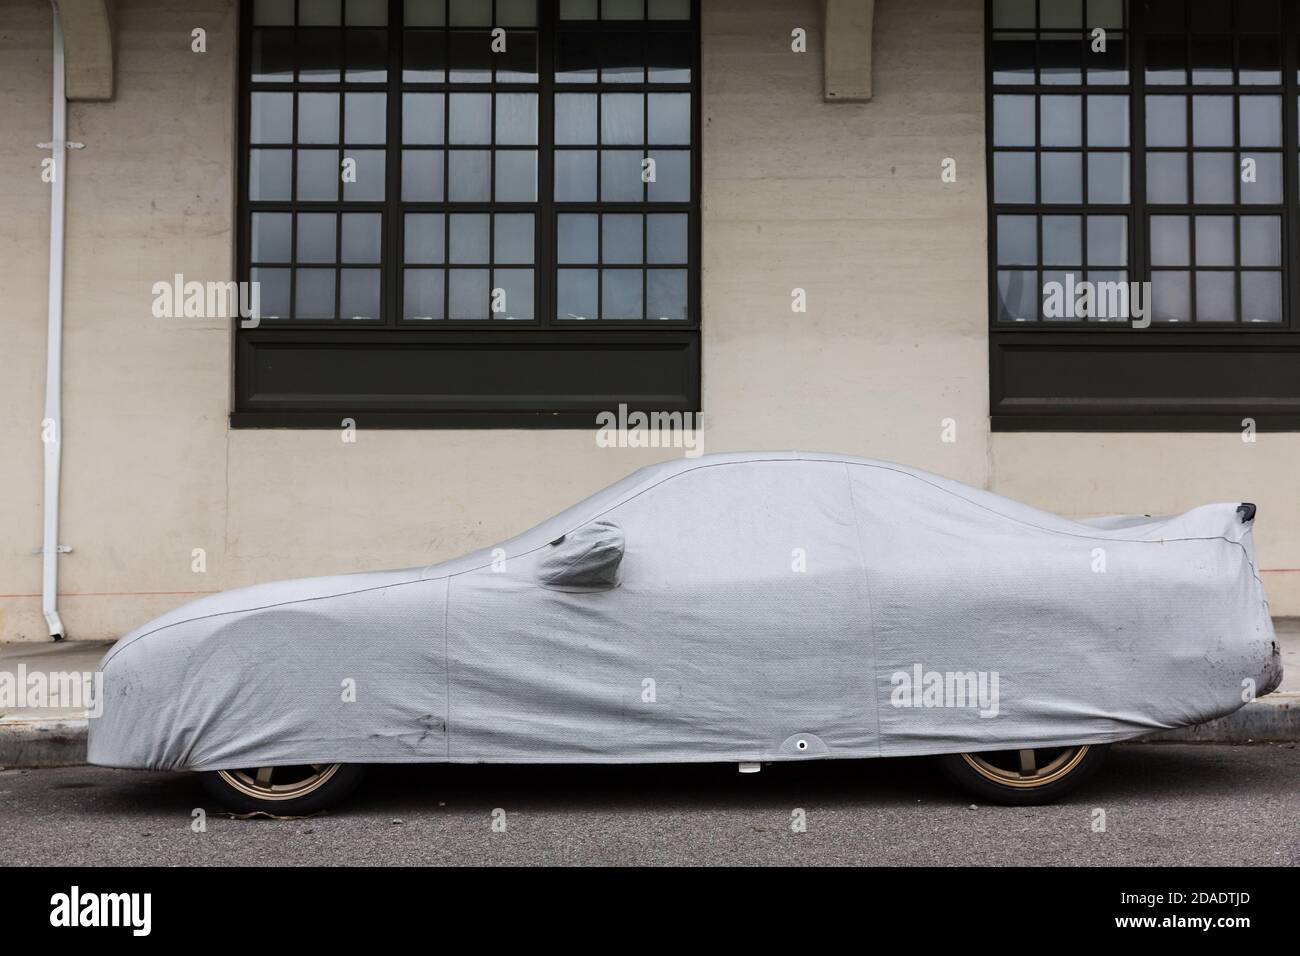 https://c8.alamy.com/comp/2DADTJD/new-york-usa-may-05-2016-new-york-city-street-scene-car-protection-cover-a-car-with-cover-sheet-on-the-streets-of-nyc-2DADTJD.jpg